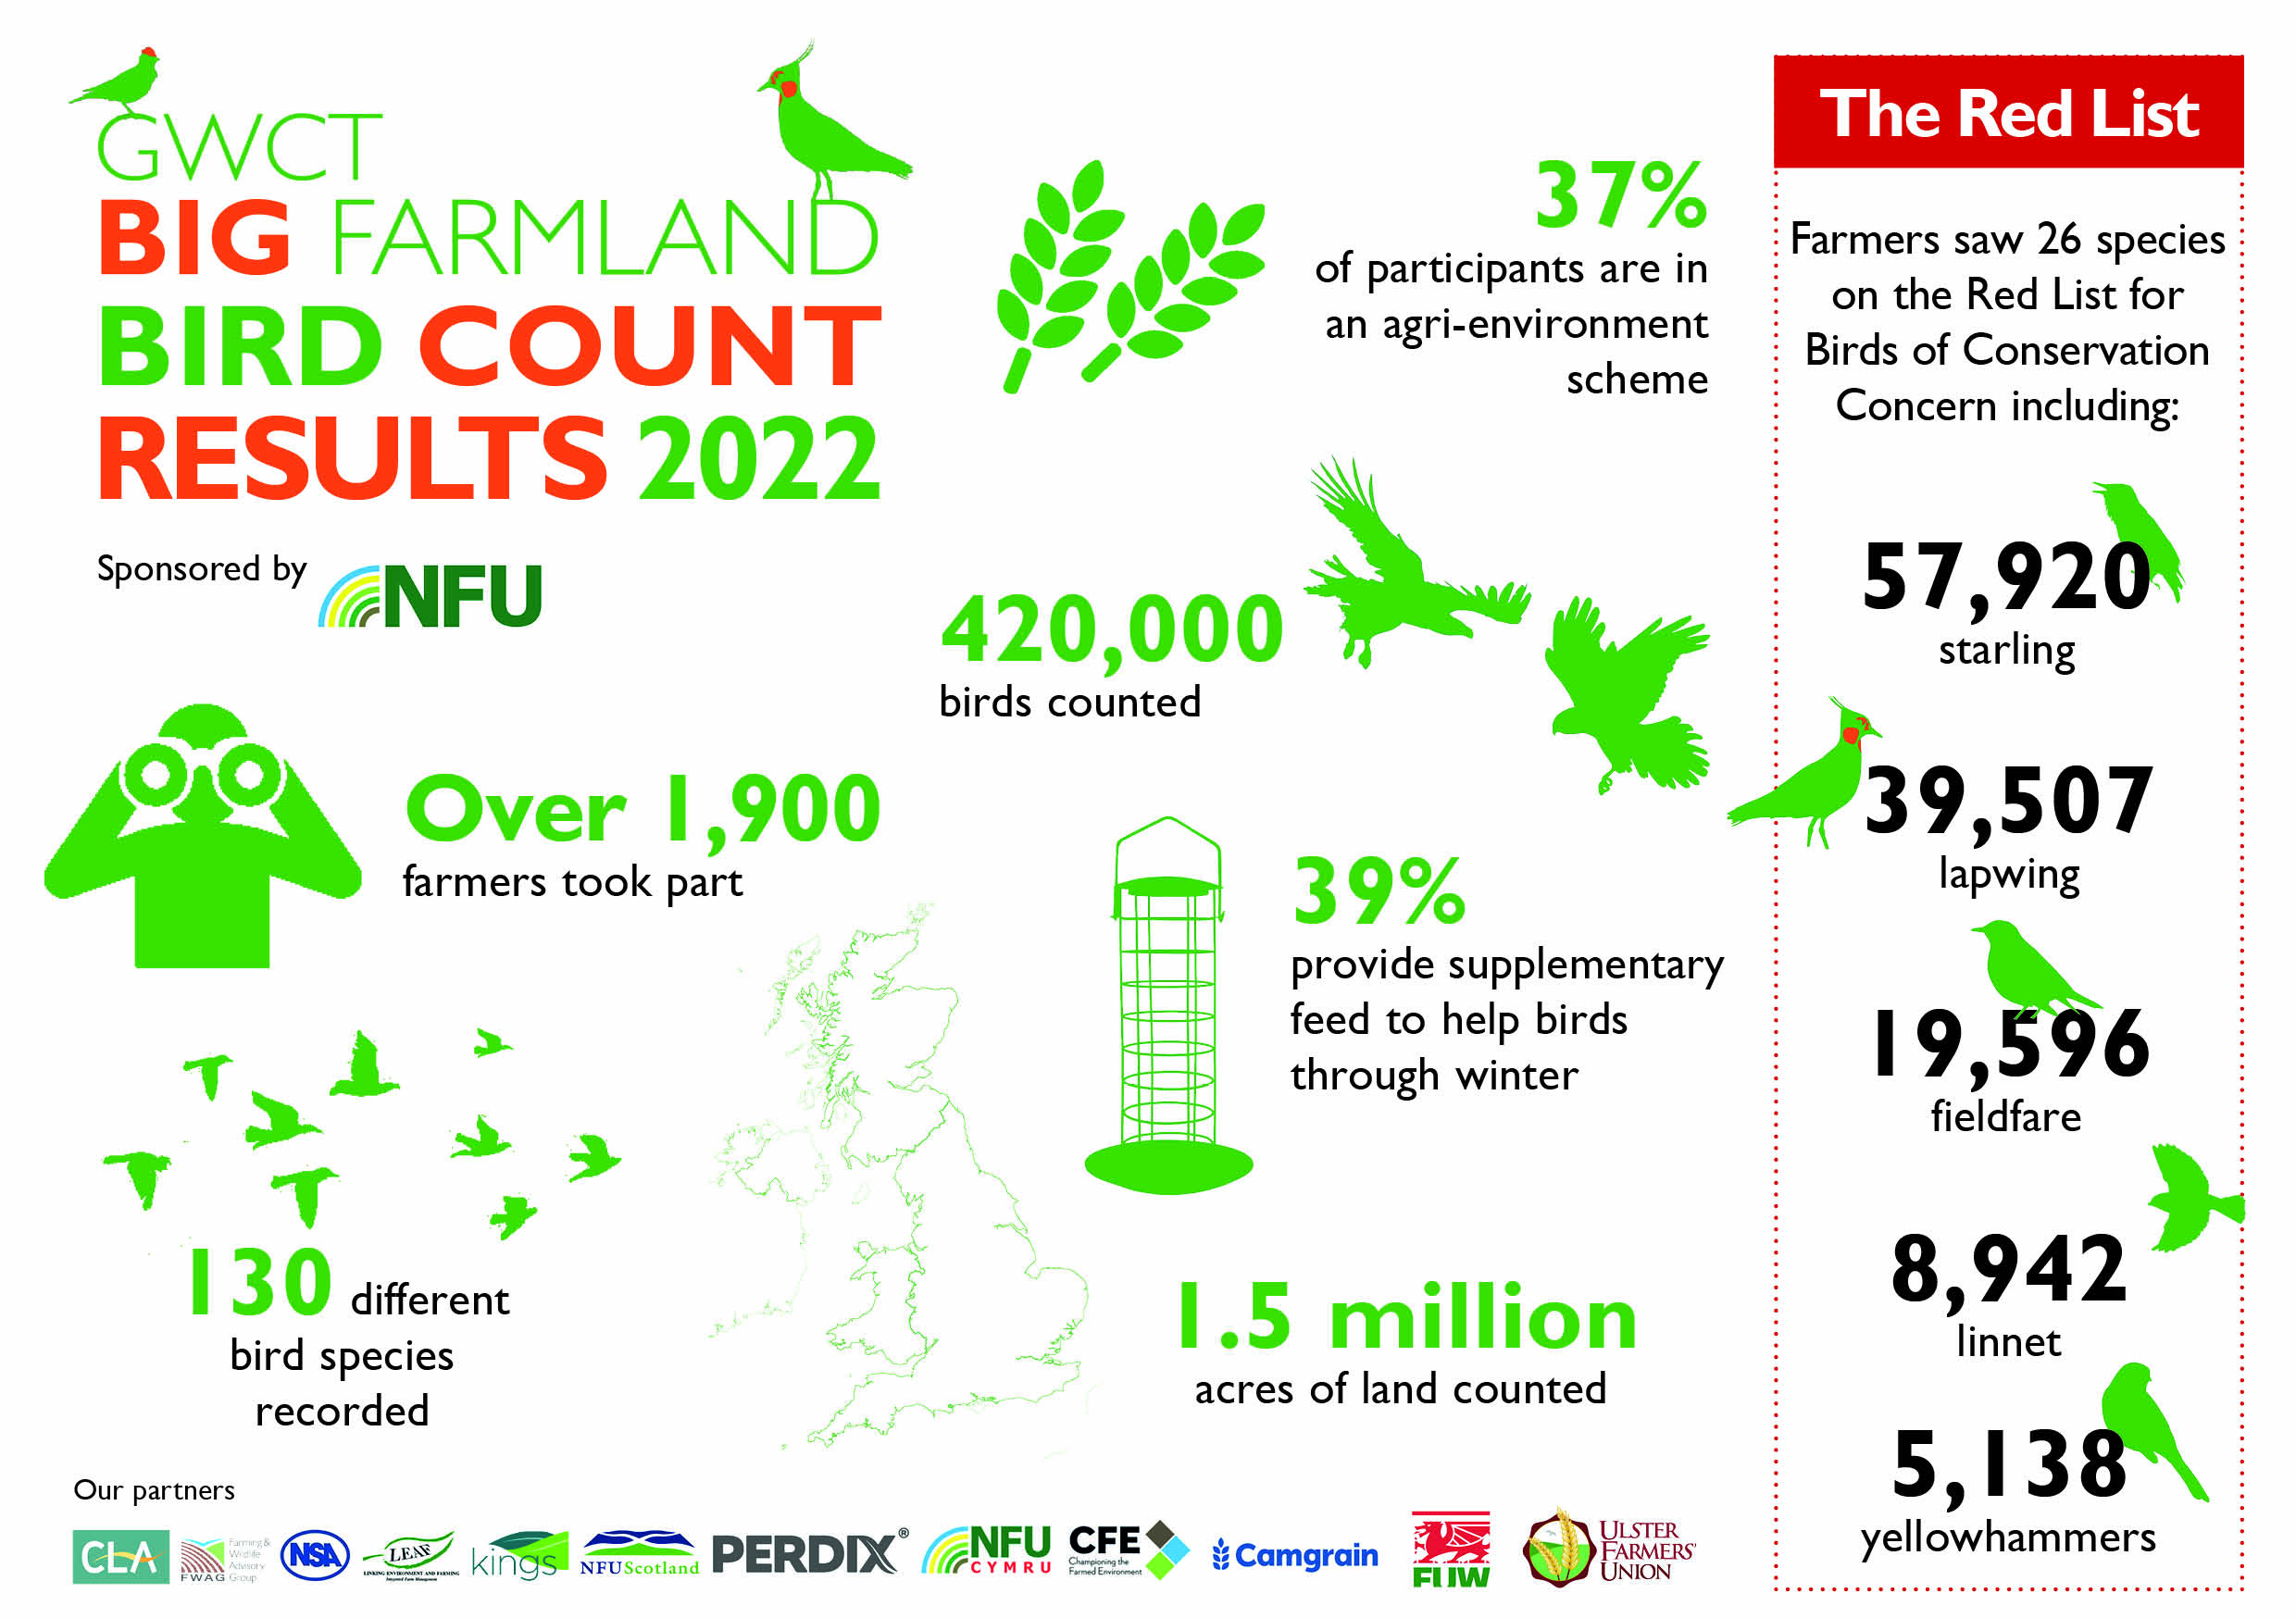 An infographic showing the results of the 2022 Big Farmland Bird Count